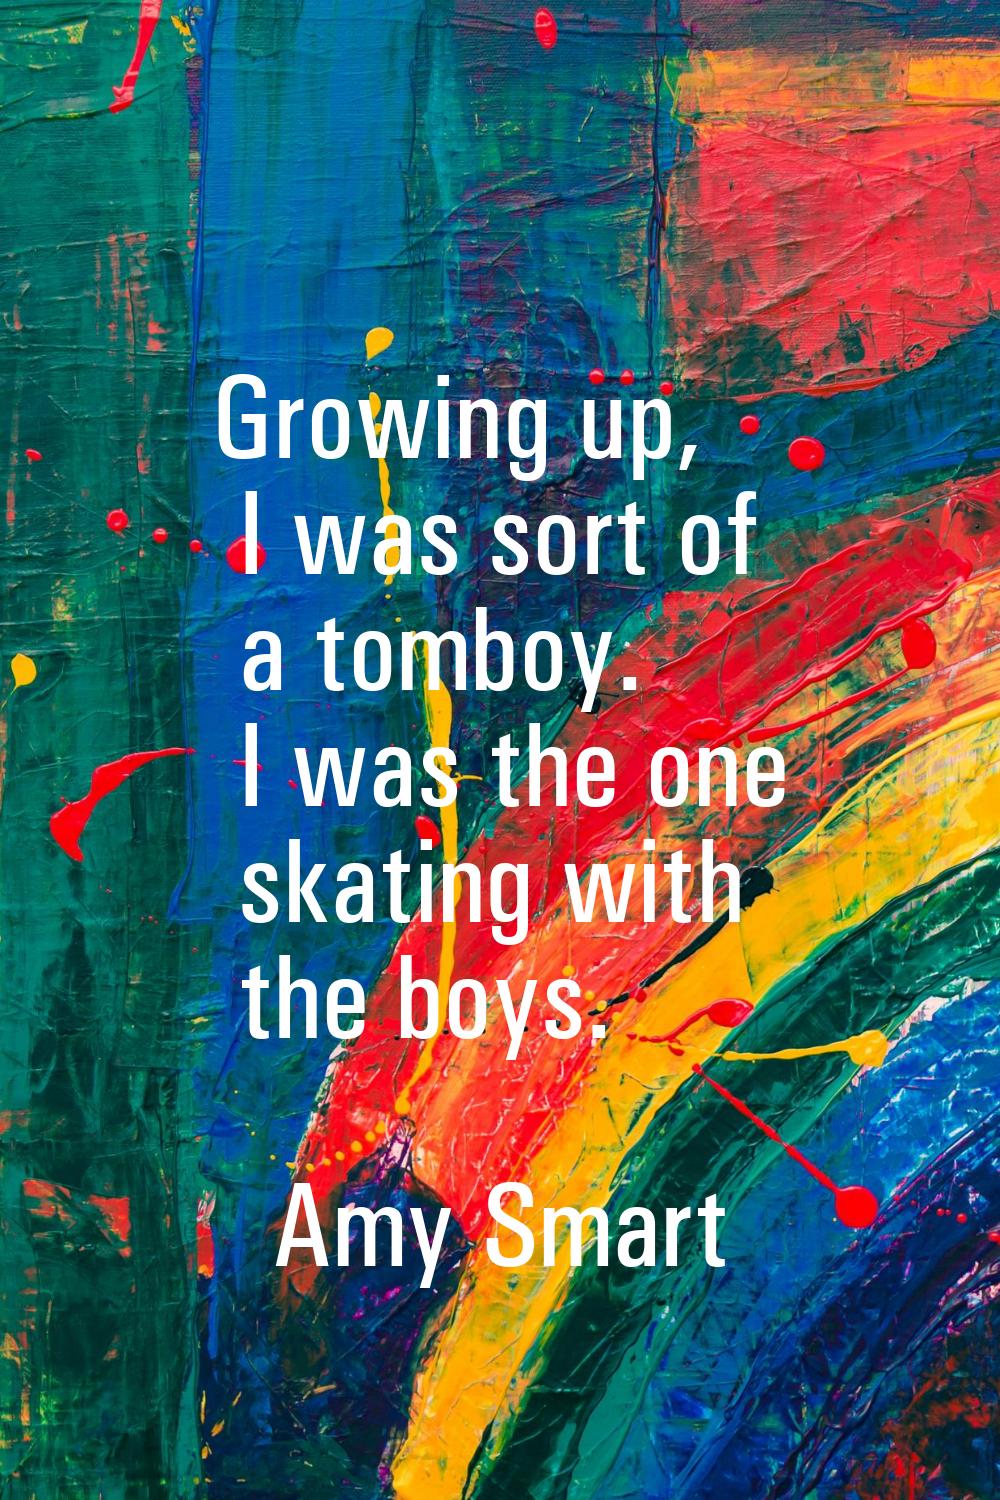 Growing up, I was sort of a tomboy. I was the one skating with the boys.